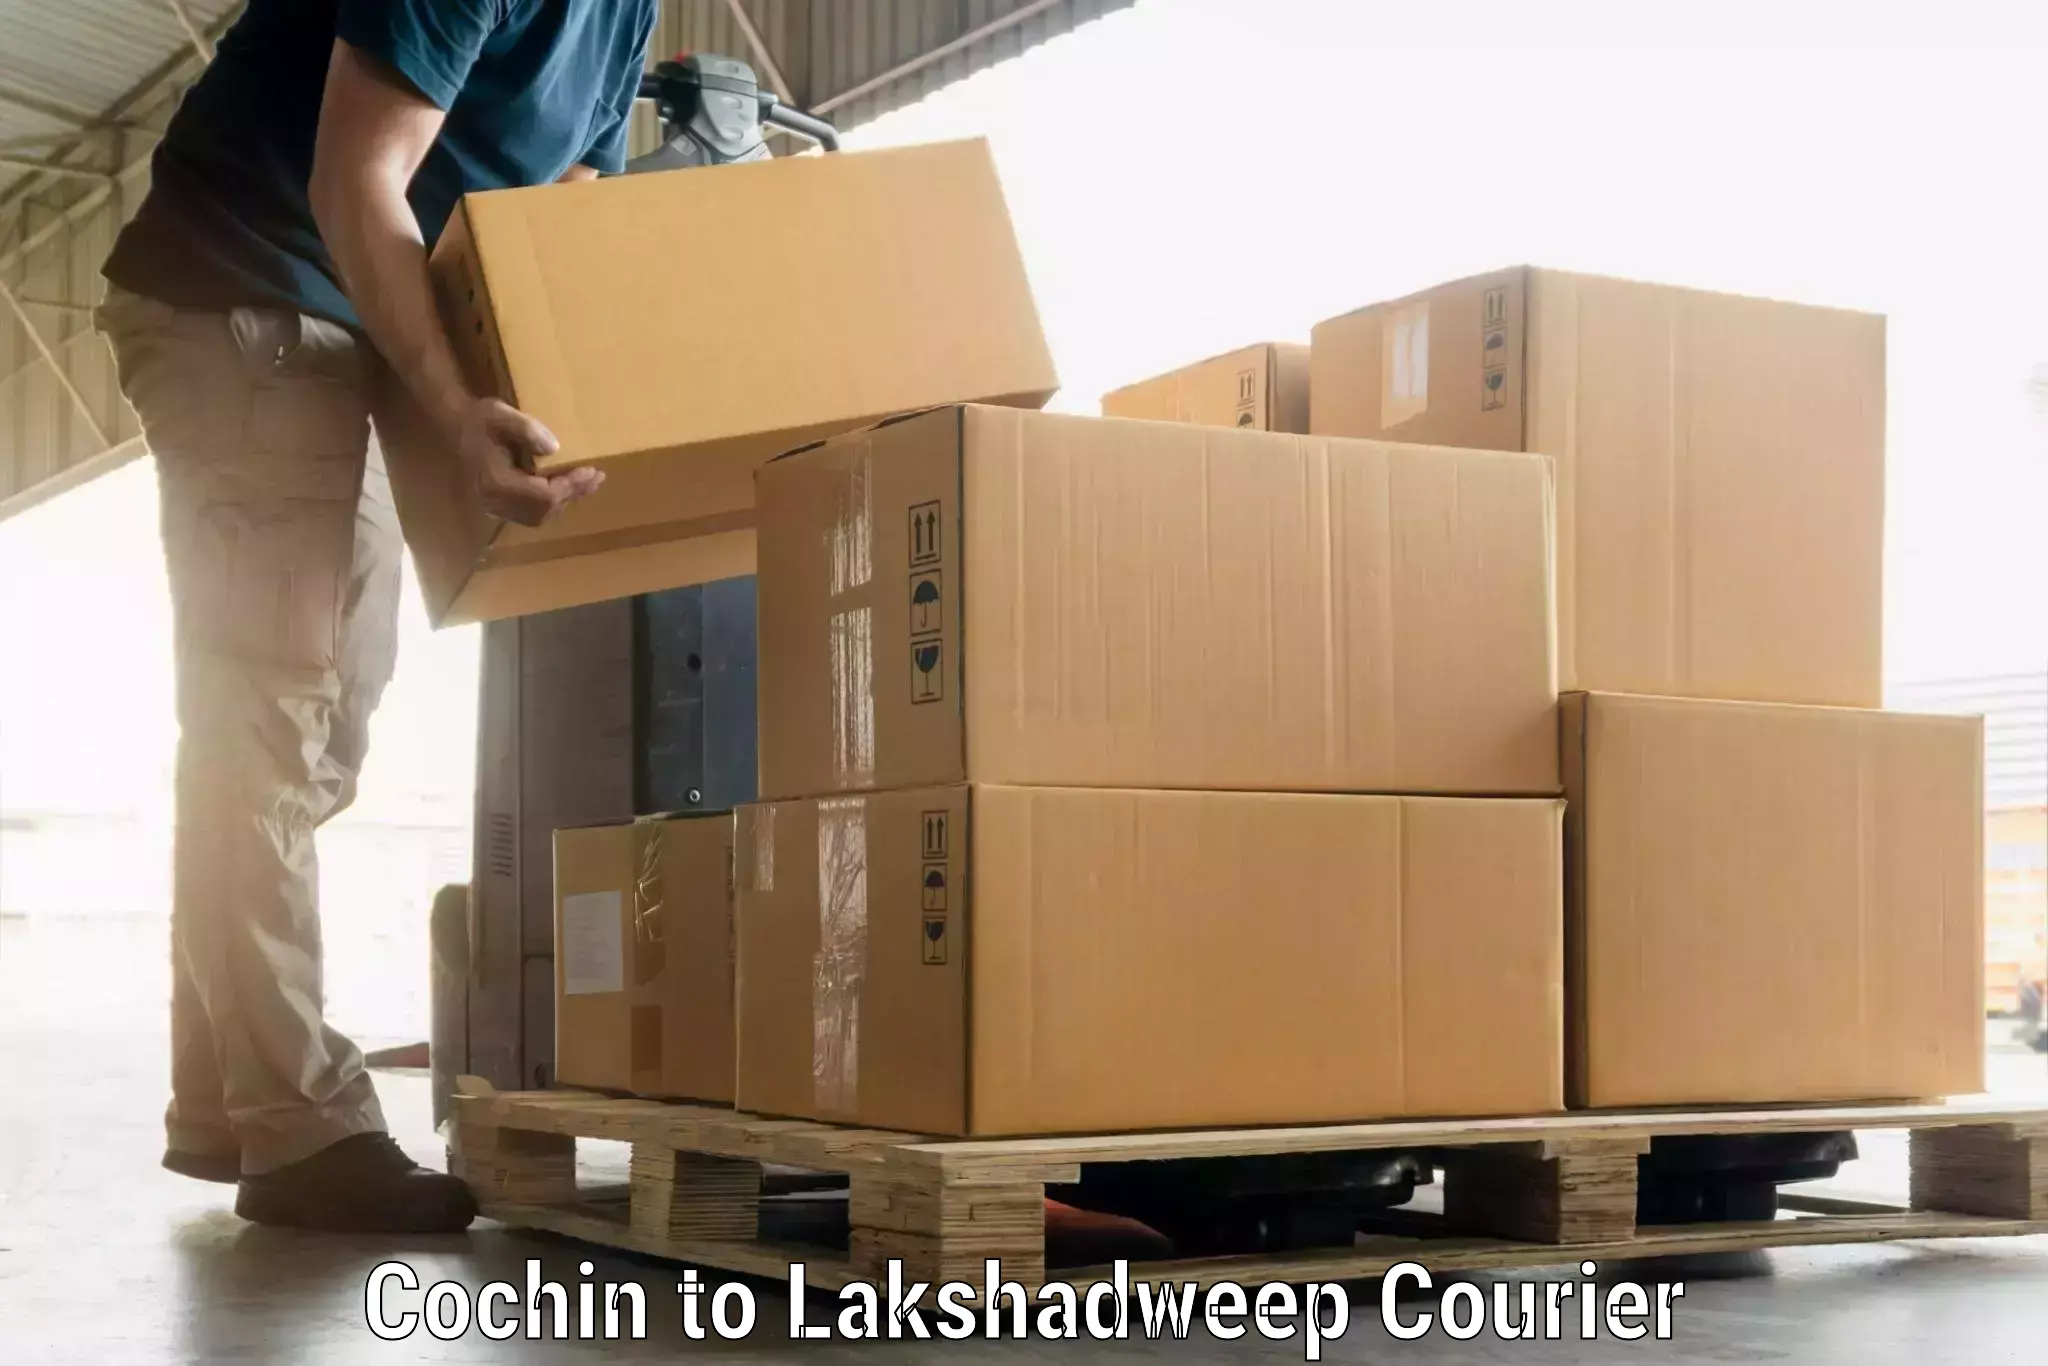 Same day luggage service in Cochin to Lakshadweep